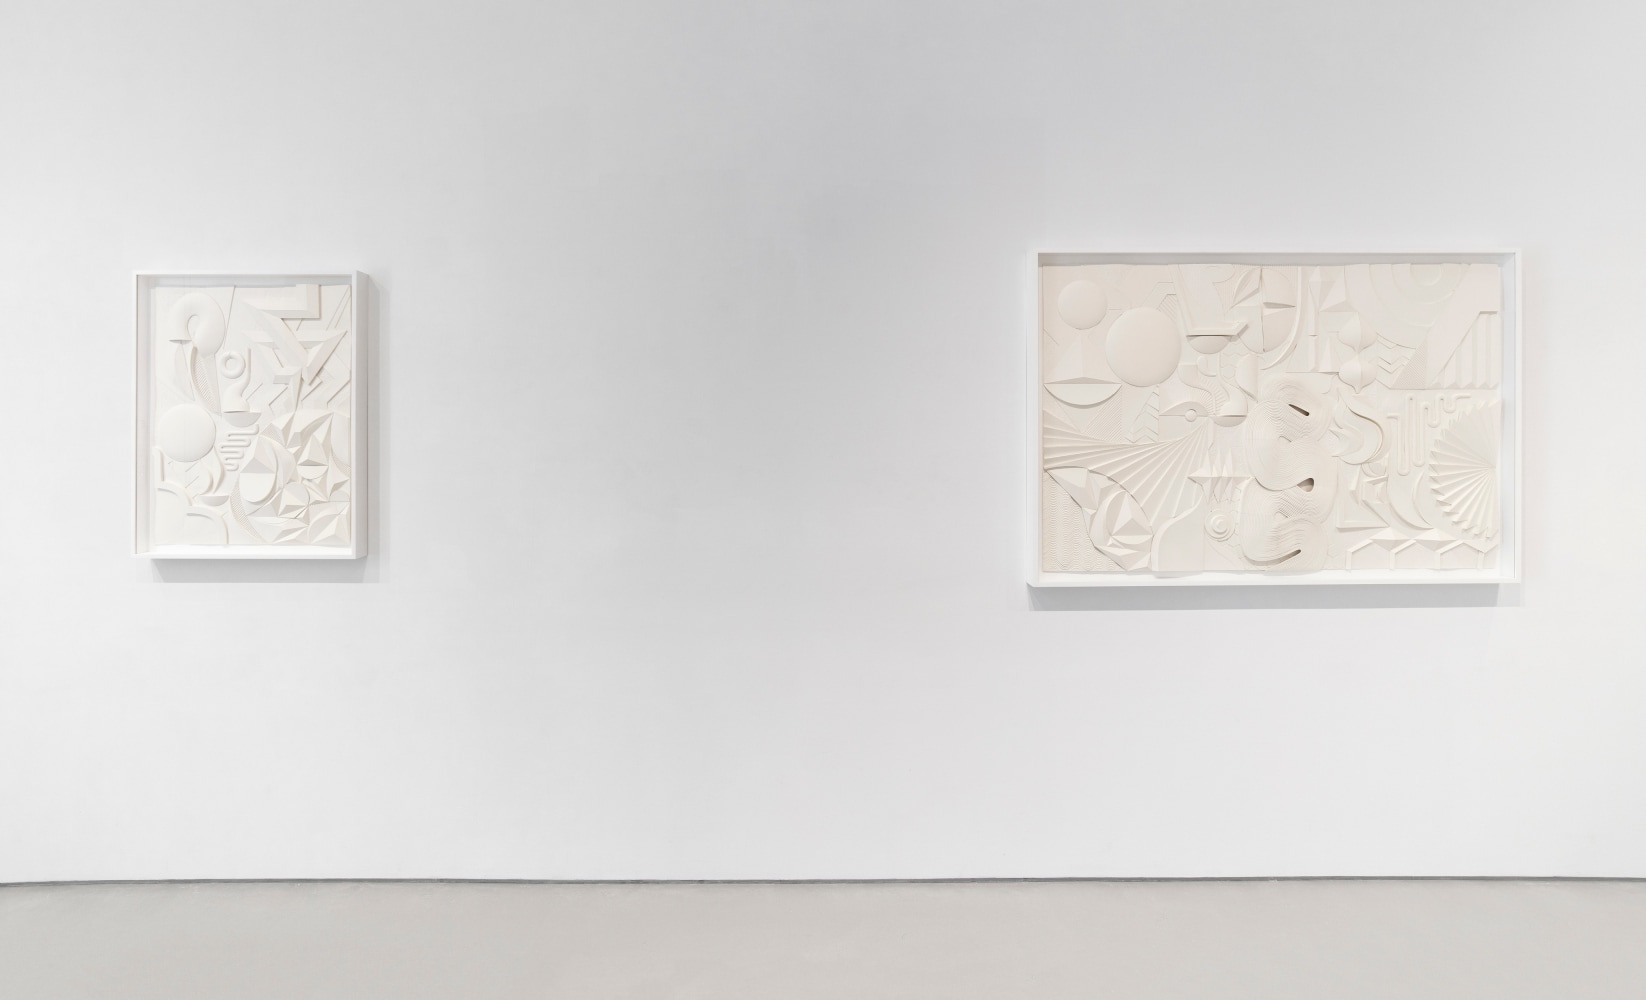 Installation view of two white artworks on a white wall